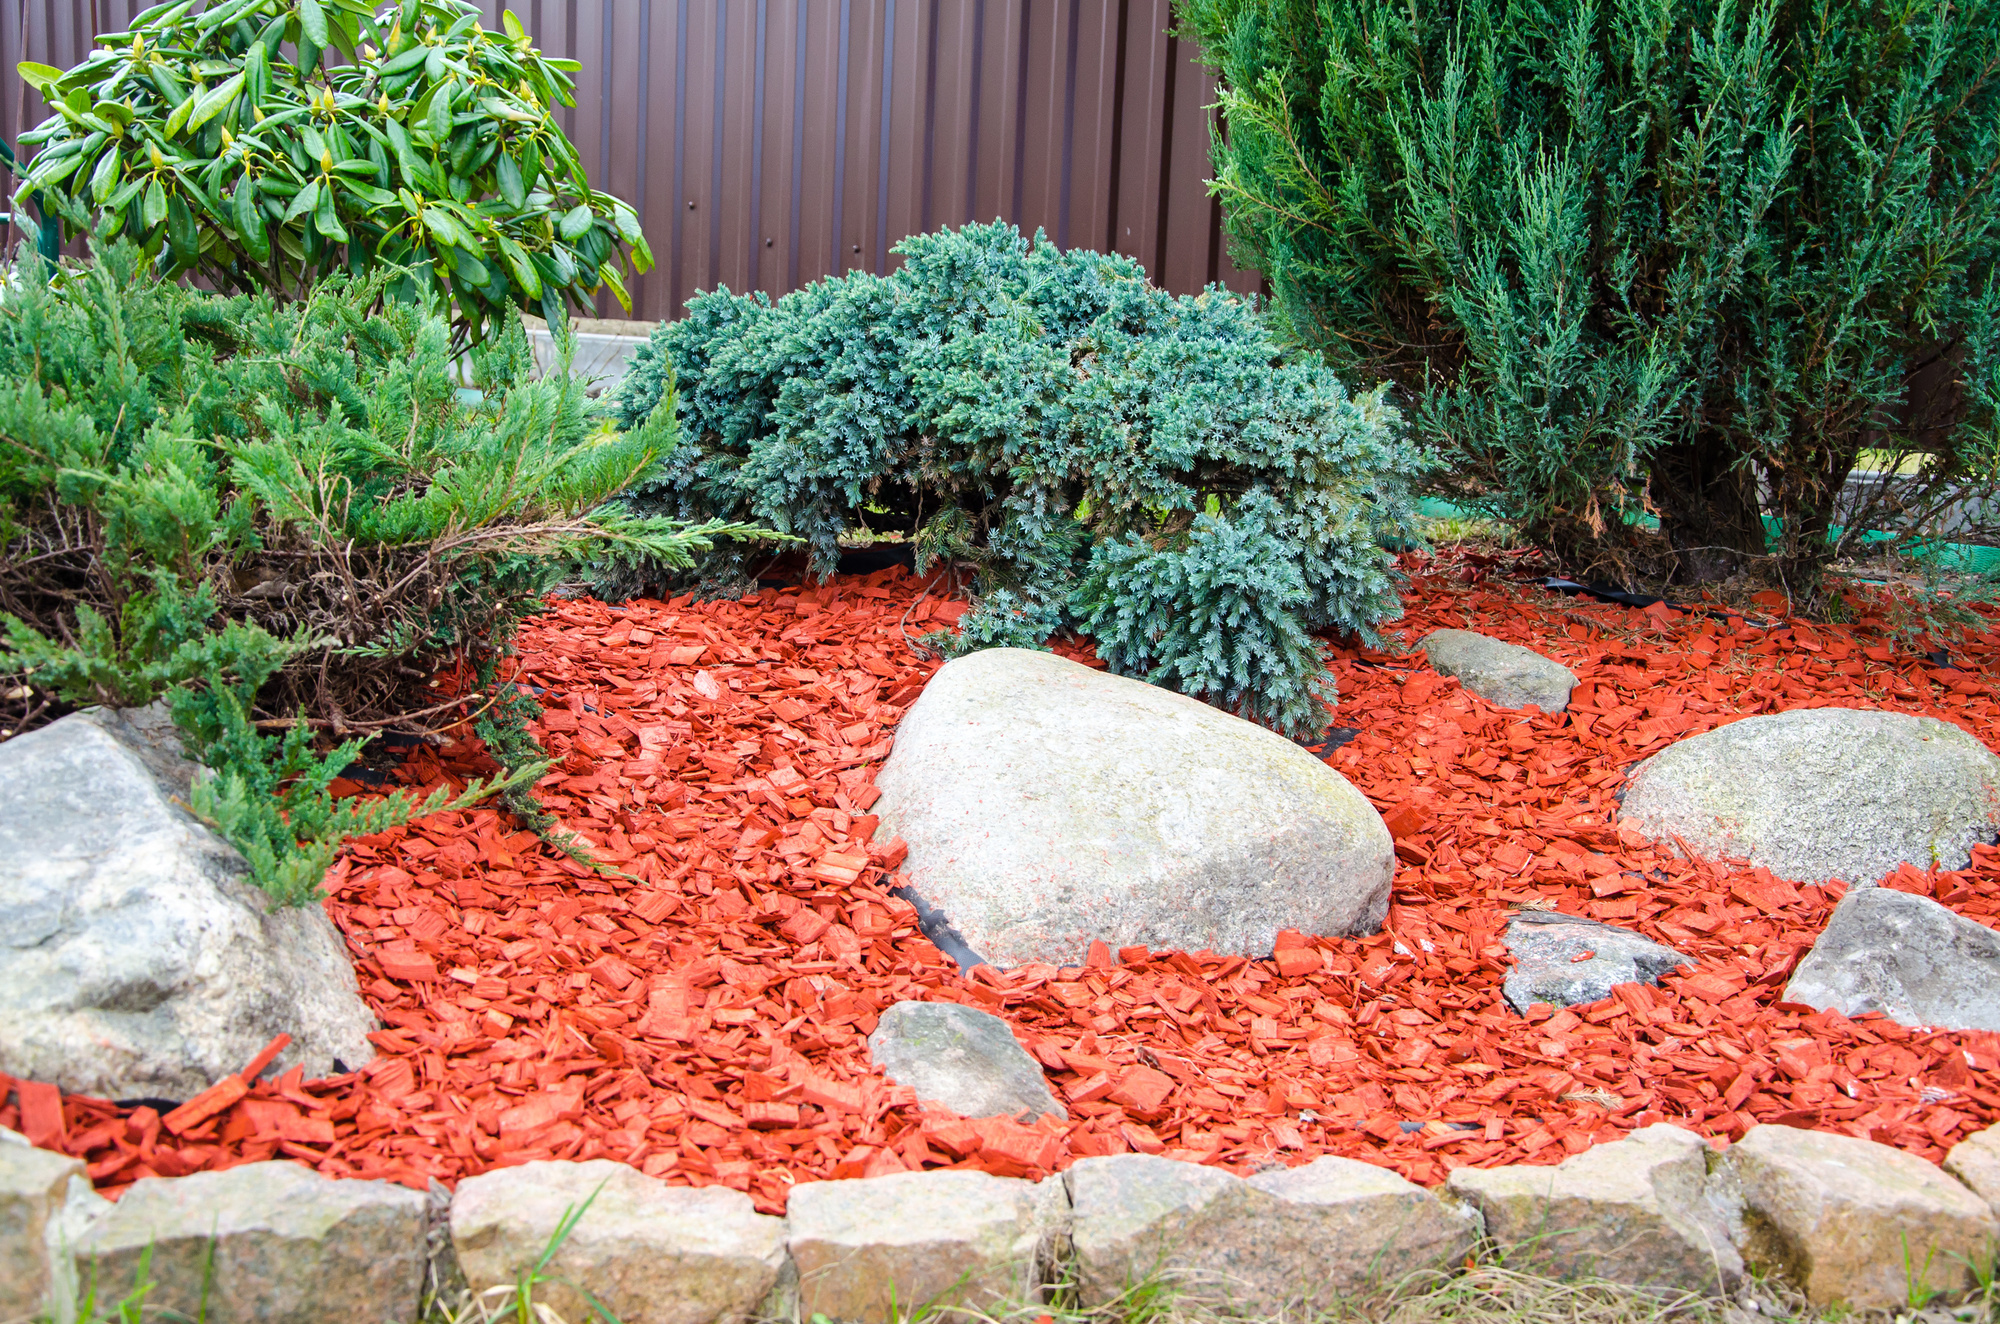 Image of Pile of red wood chips in a garden